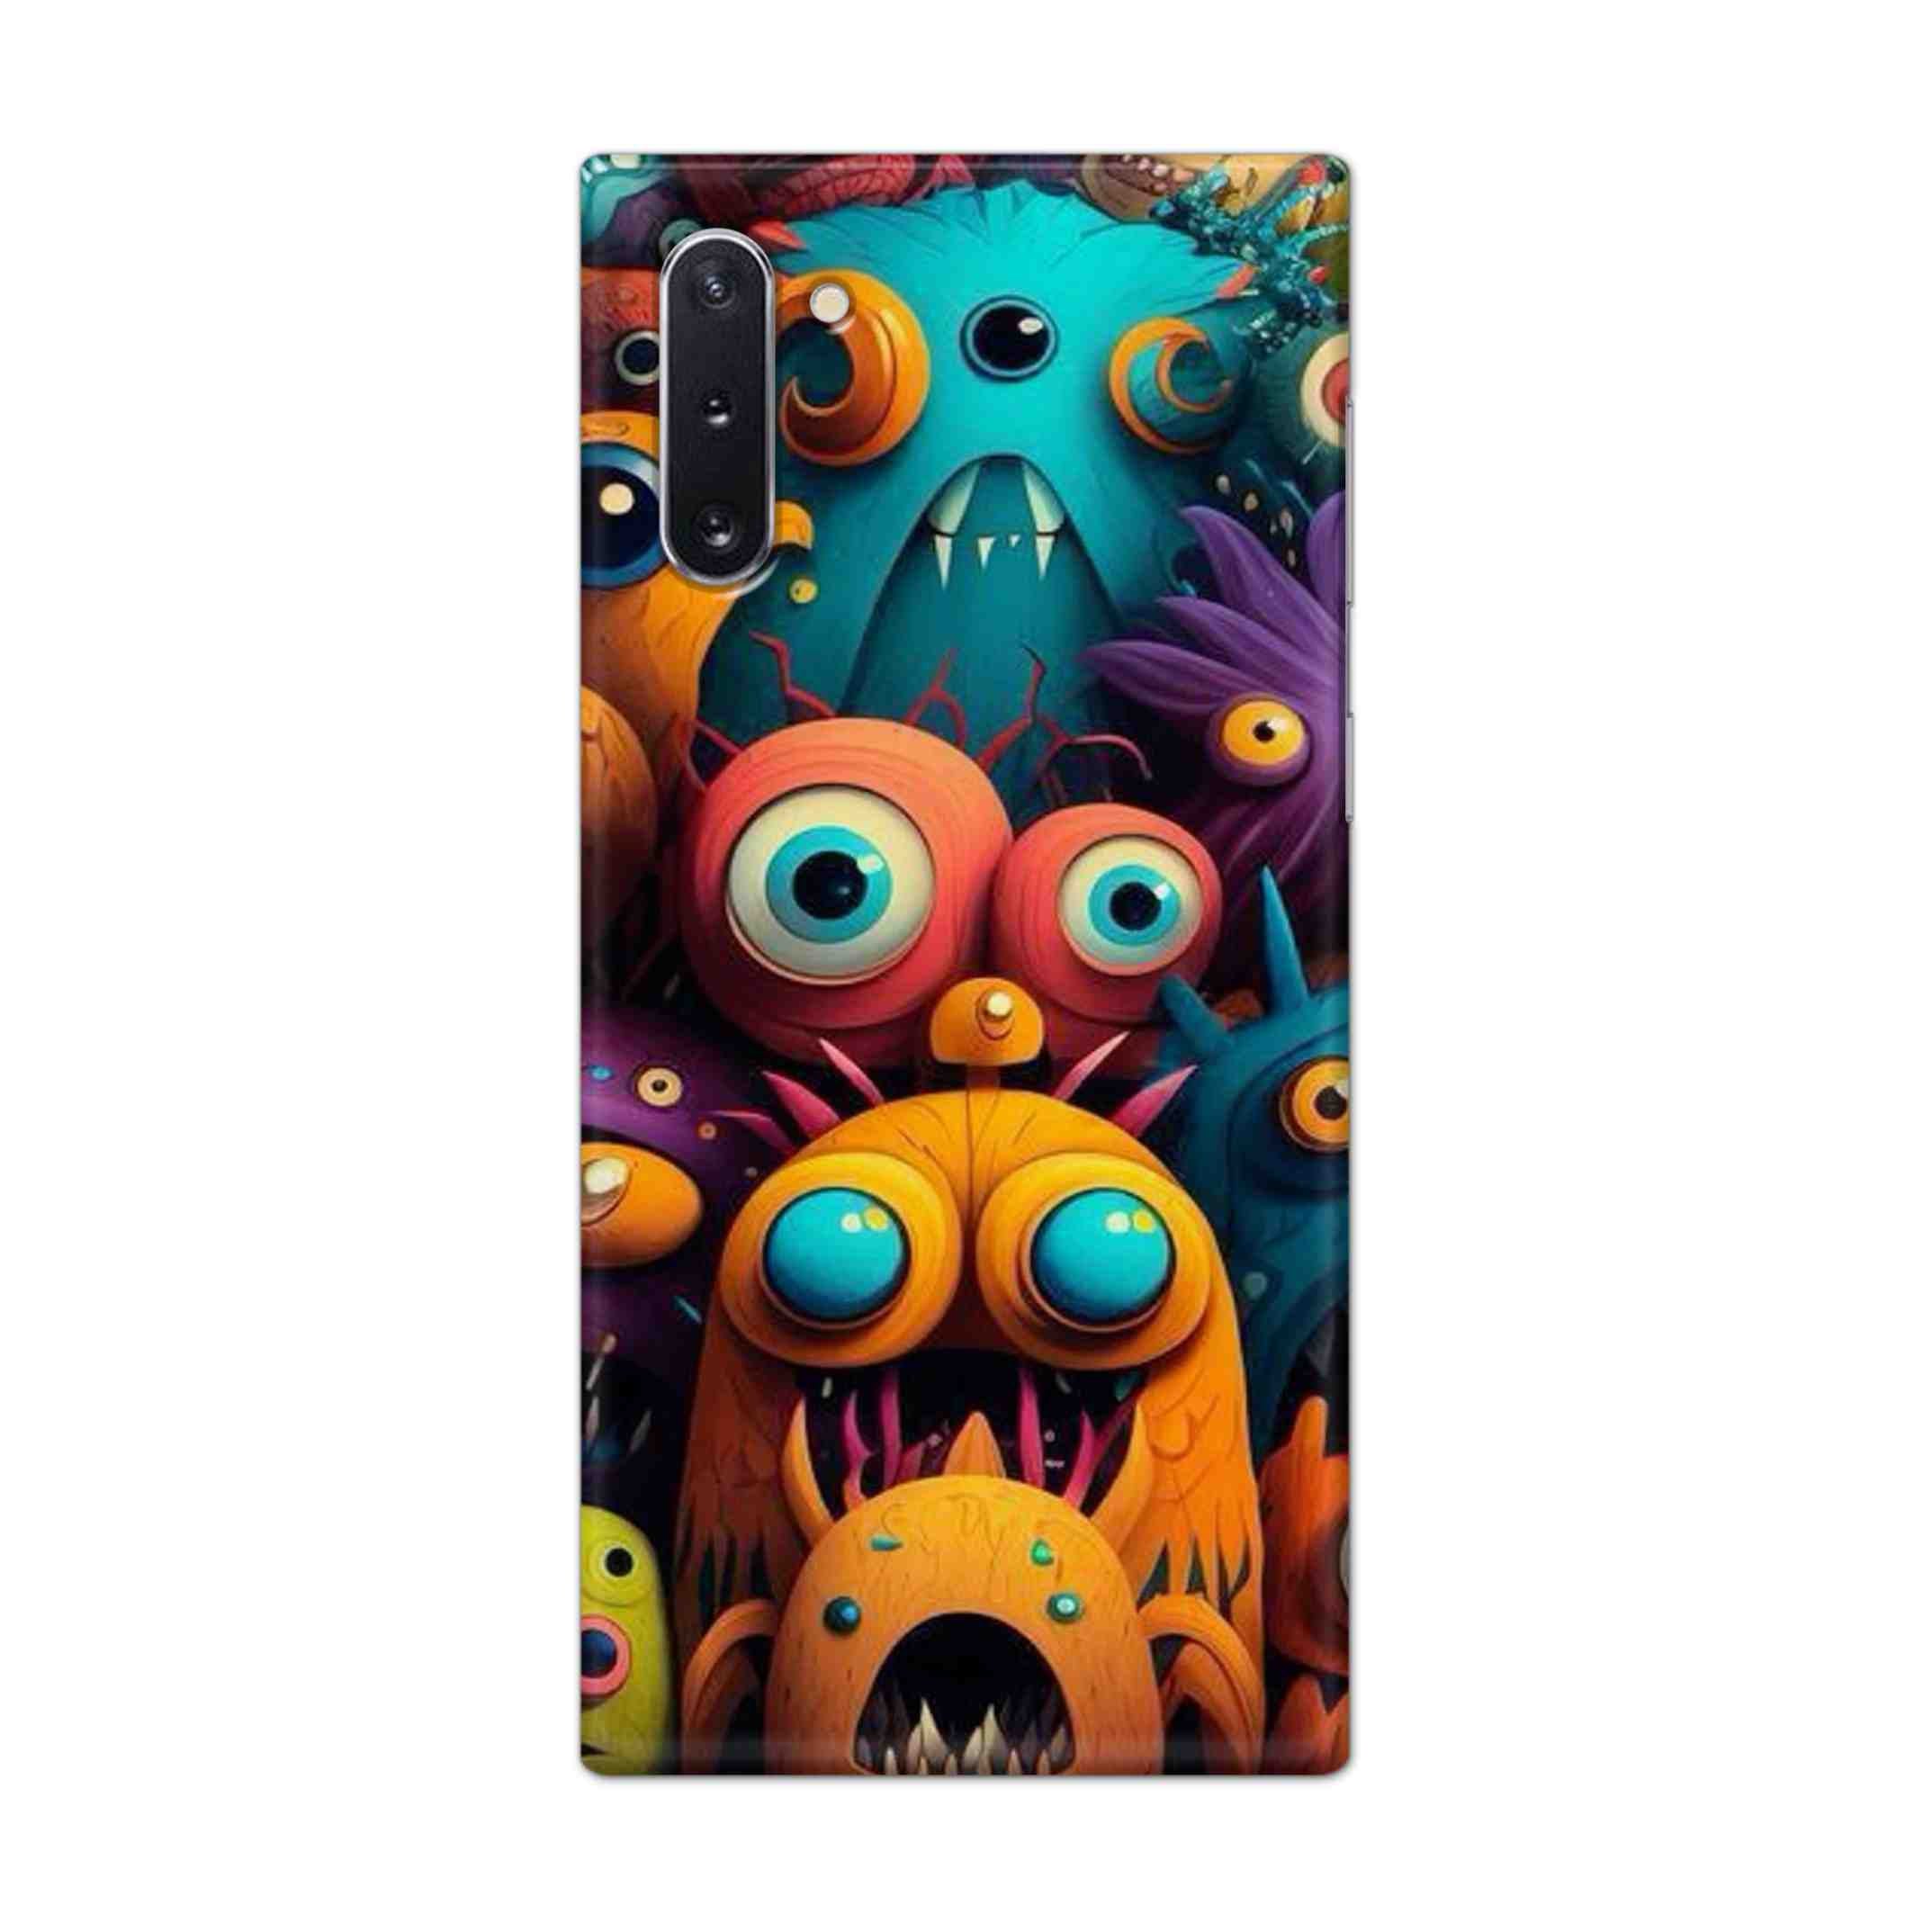 Buy Zombie Hard Back Mobile Phone Case Cover For Samsung Galaxy Note 10 Online